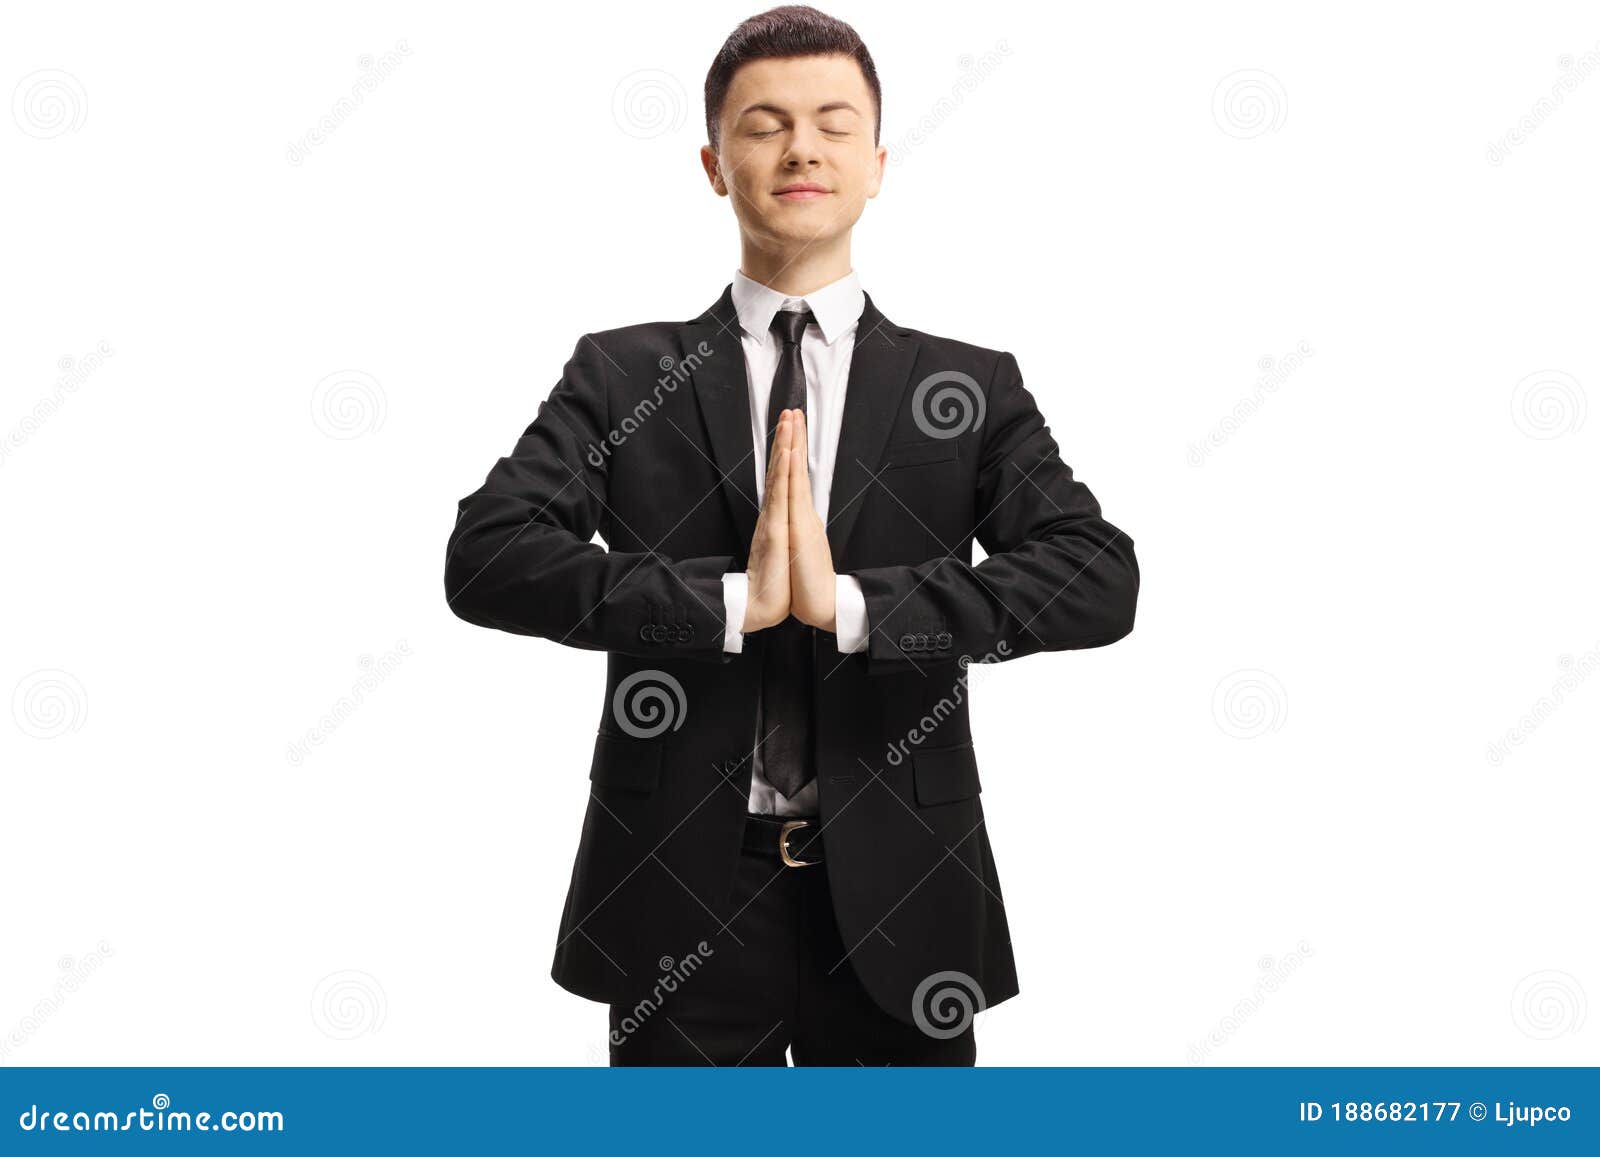 Guy in a Suit and Tie Meditating with Closed Eyes Stock Image - Image ...